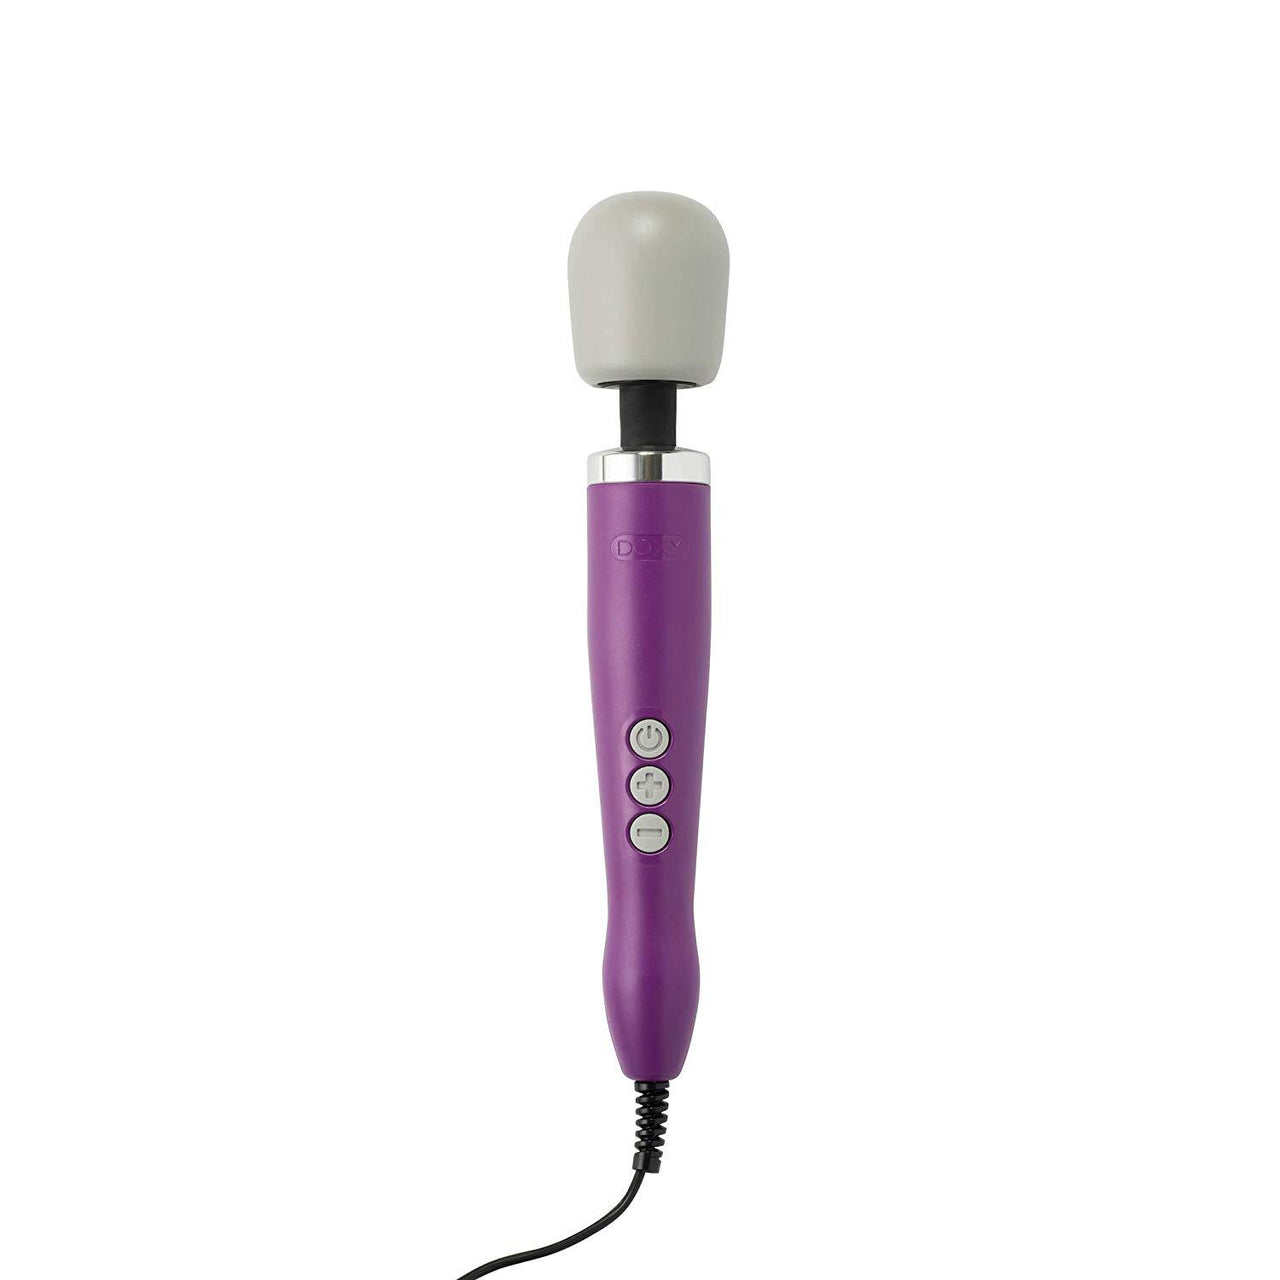 a purple and white hair dryer on a white background